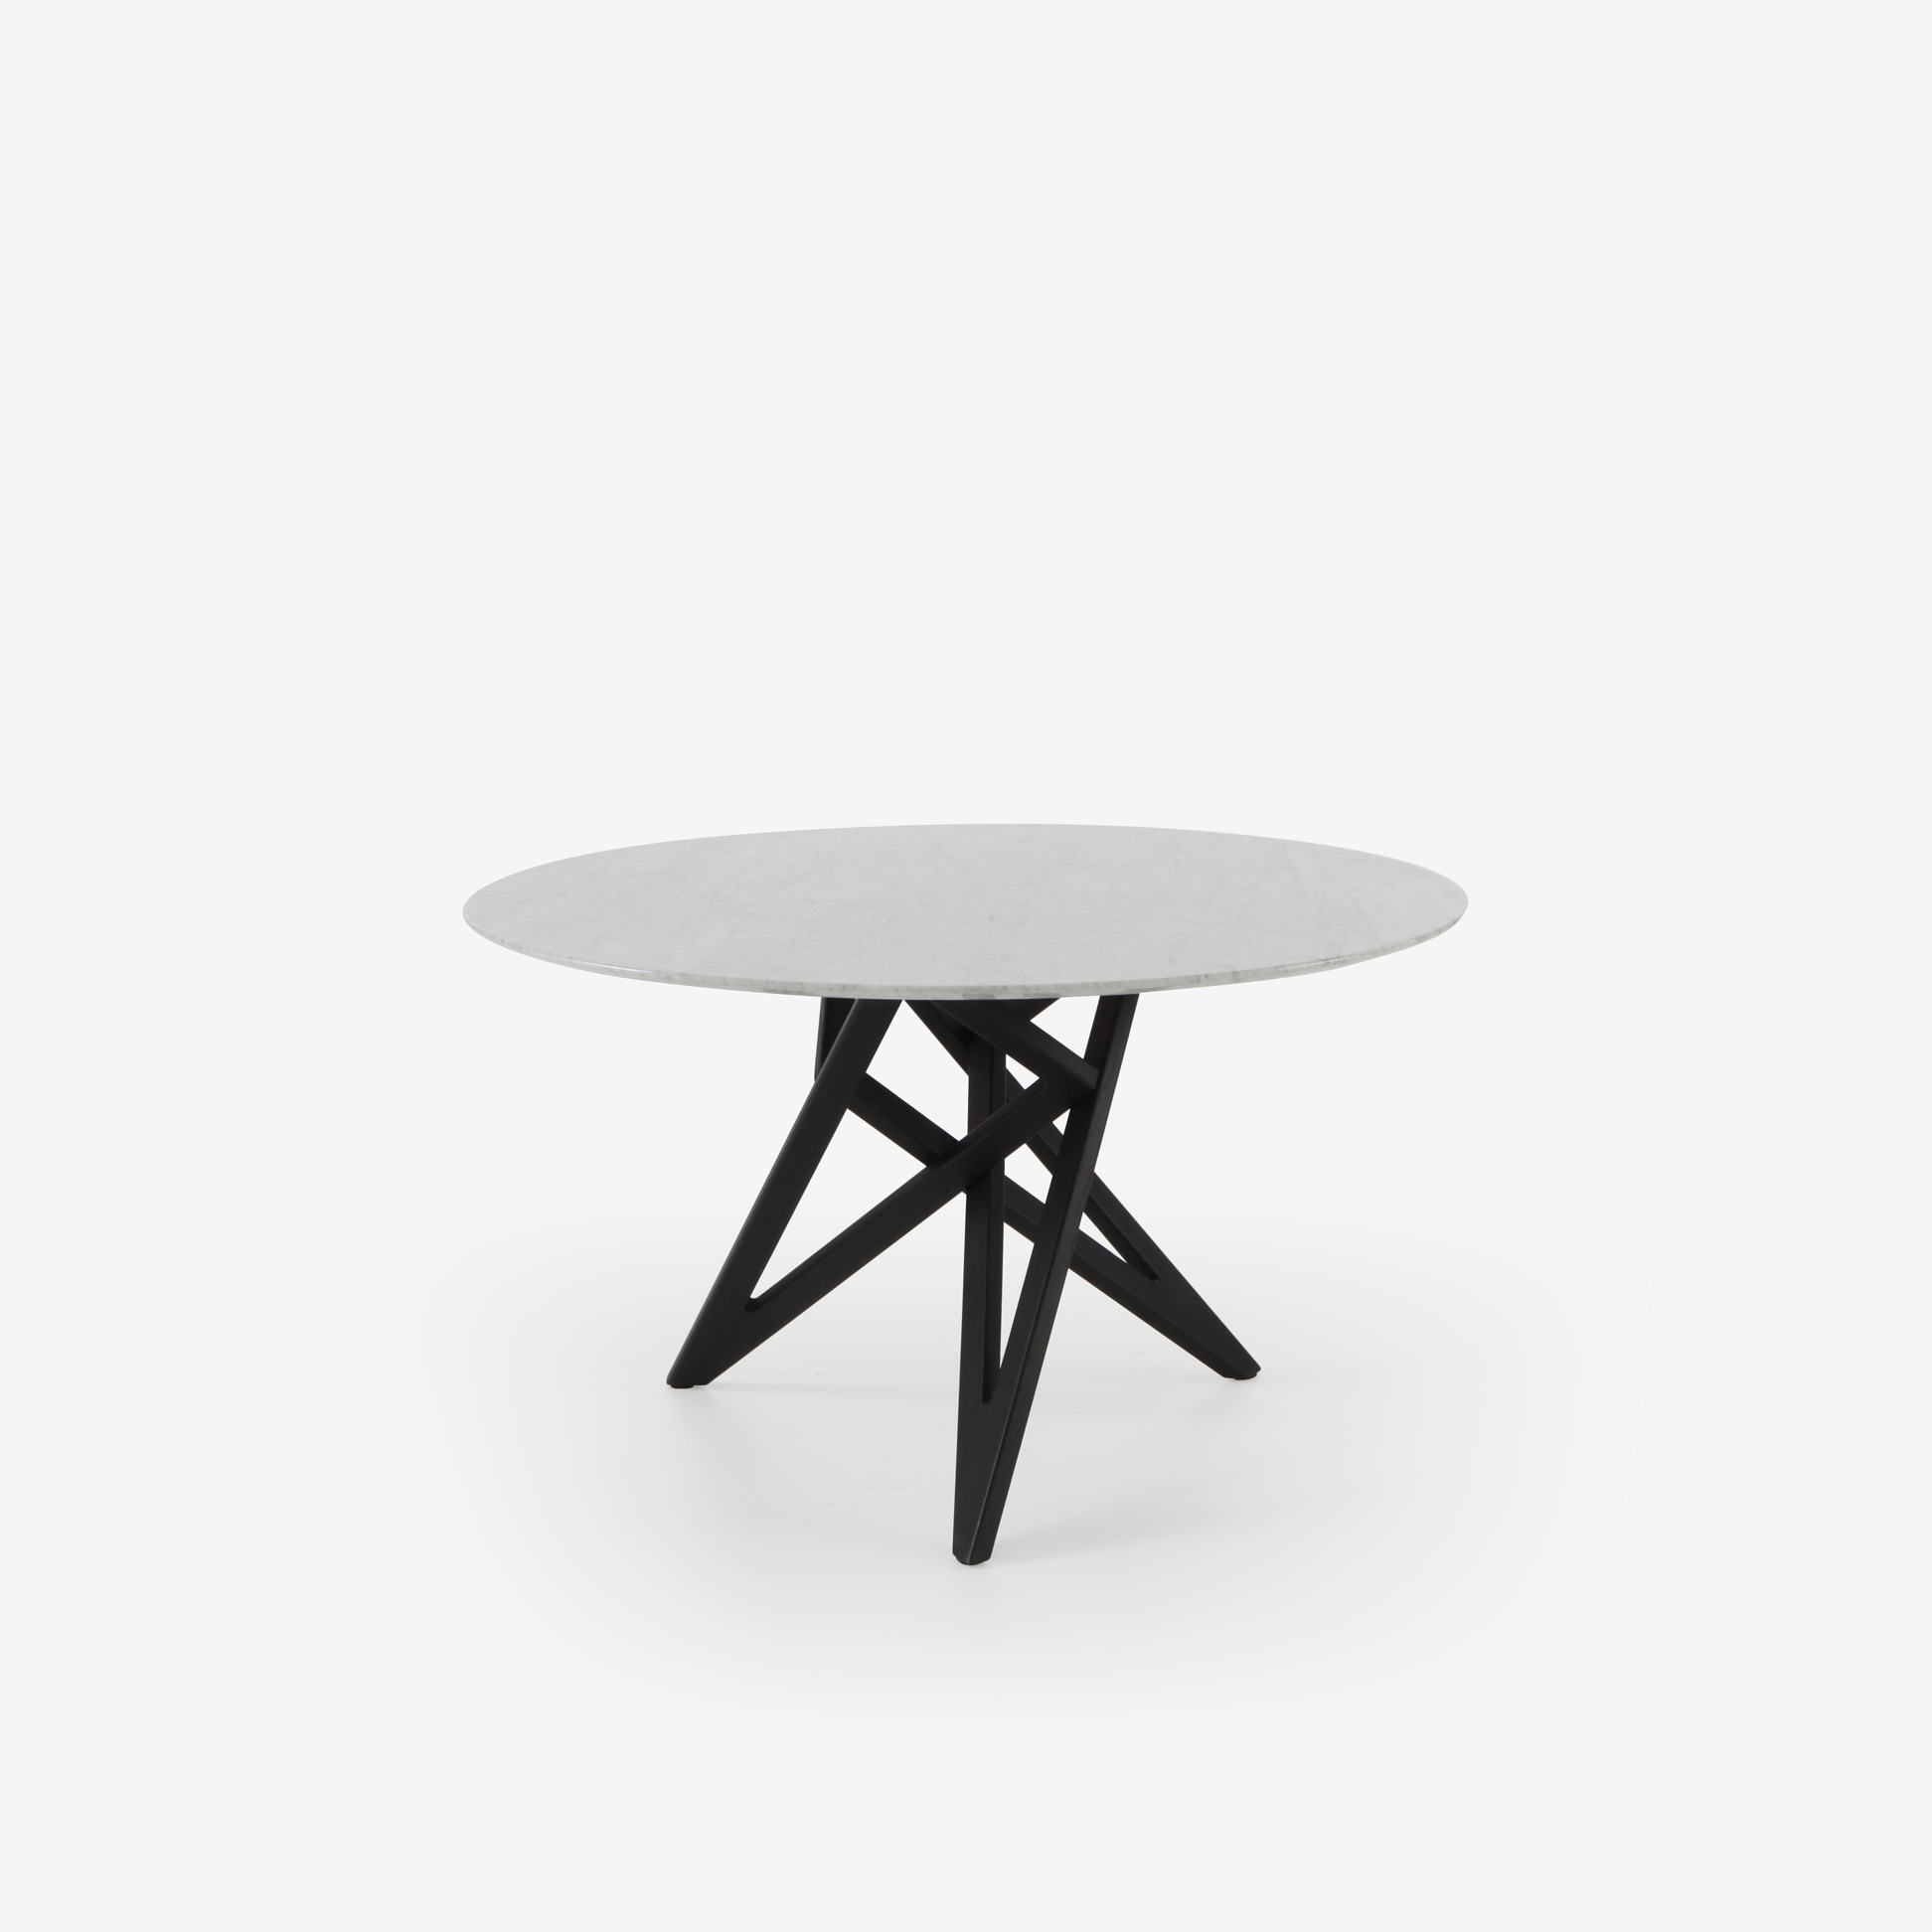 Image ROUND DINING TABLE BASE IN BLACK STAINED ASH 